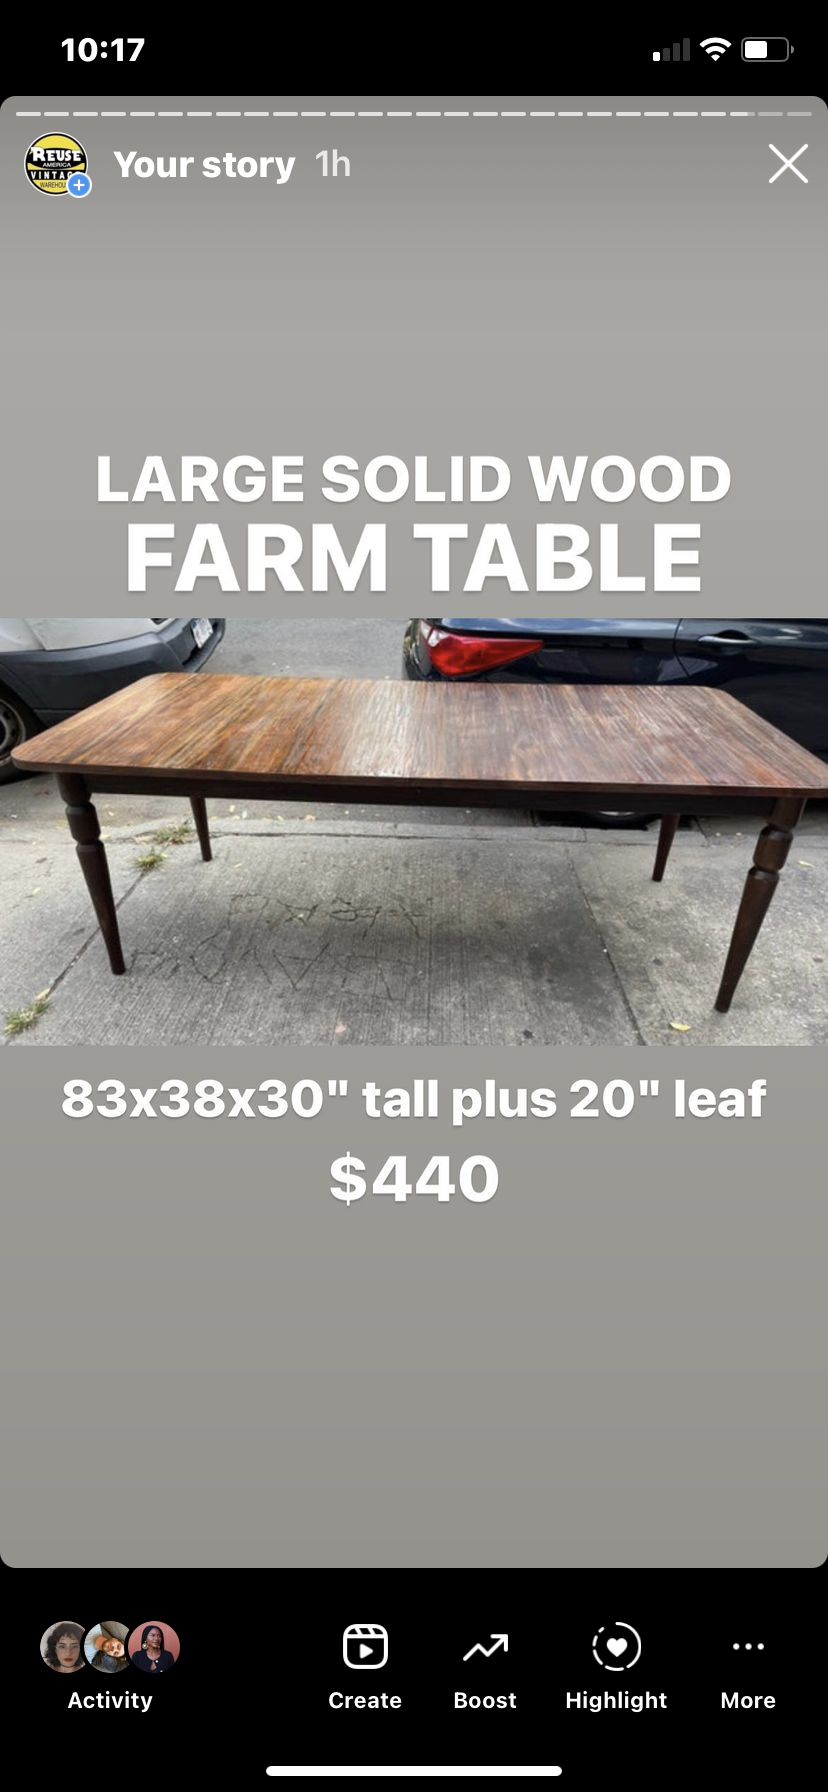 Large solid wood farm table